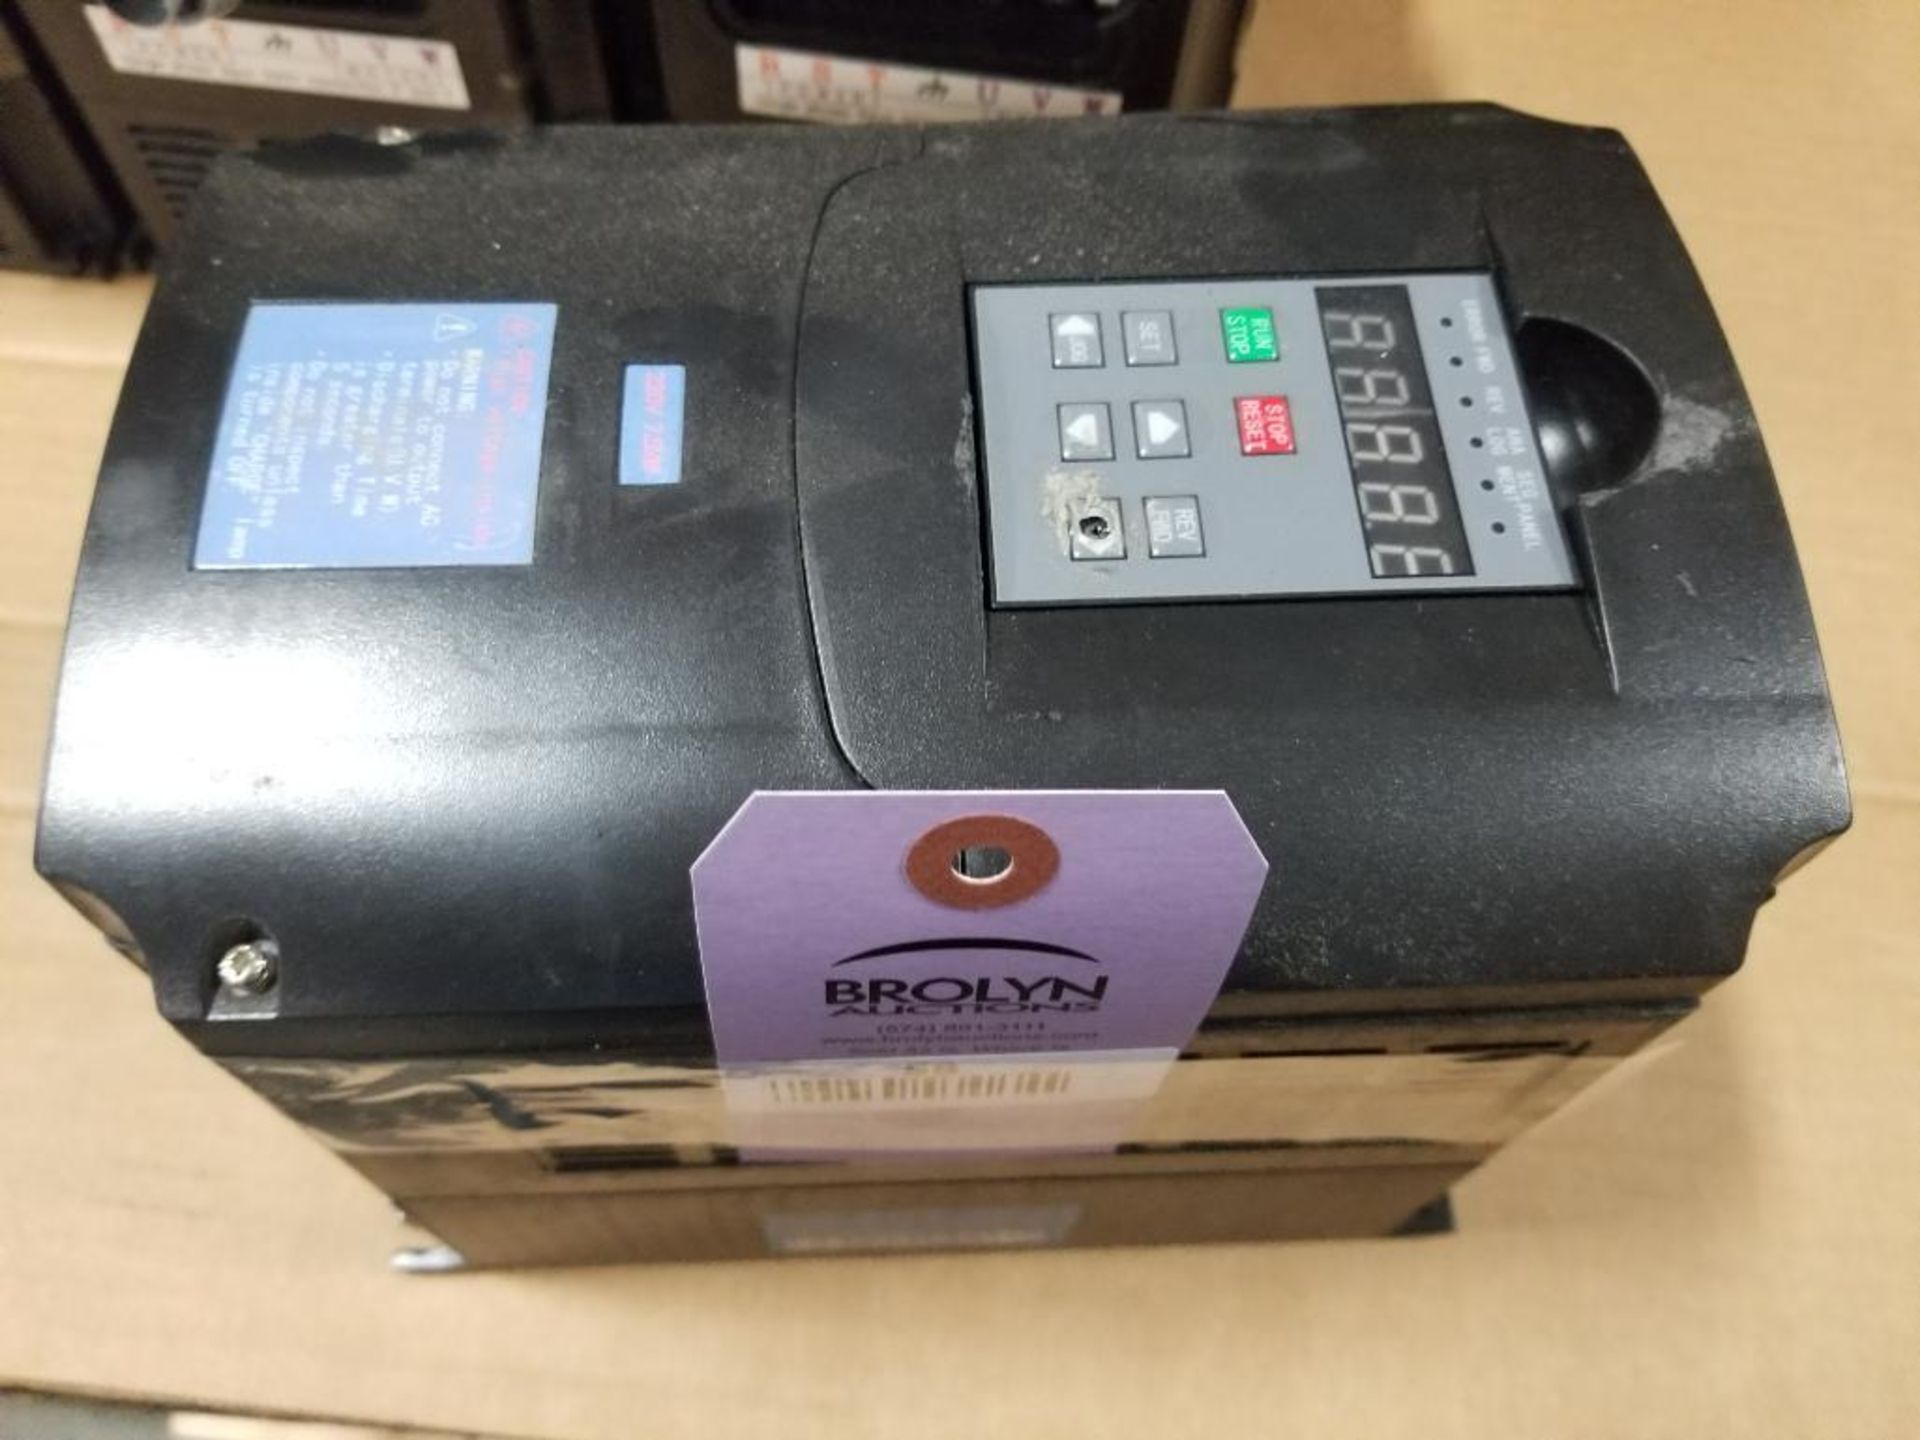 Variable frequency drive. Model A2-8075.